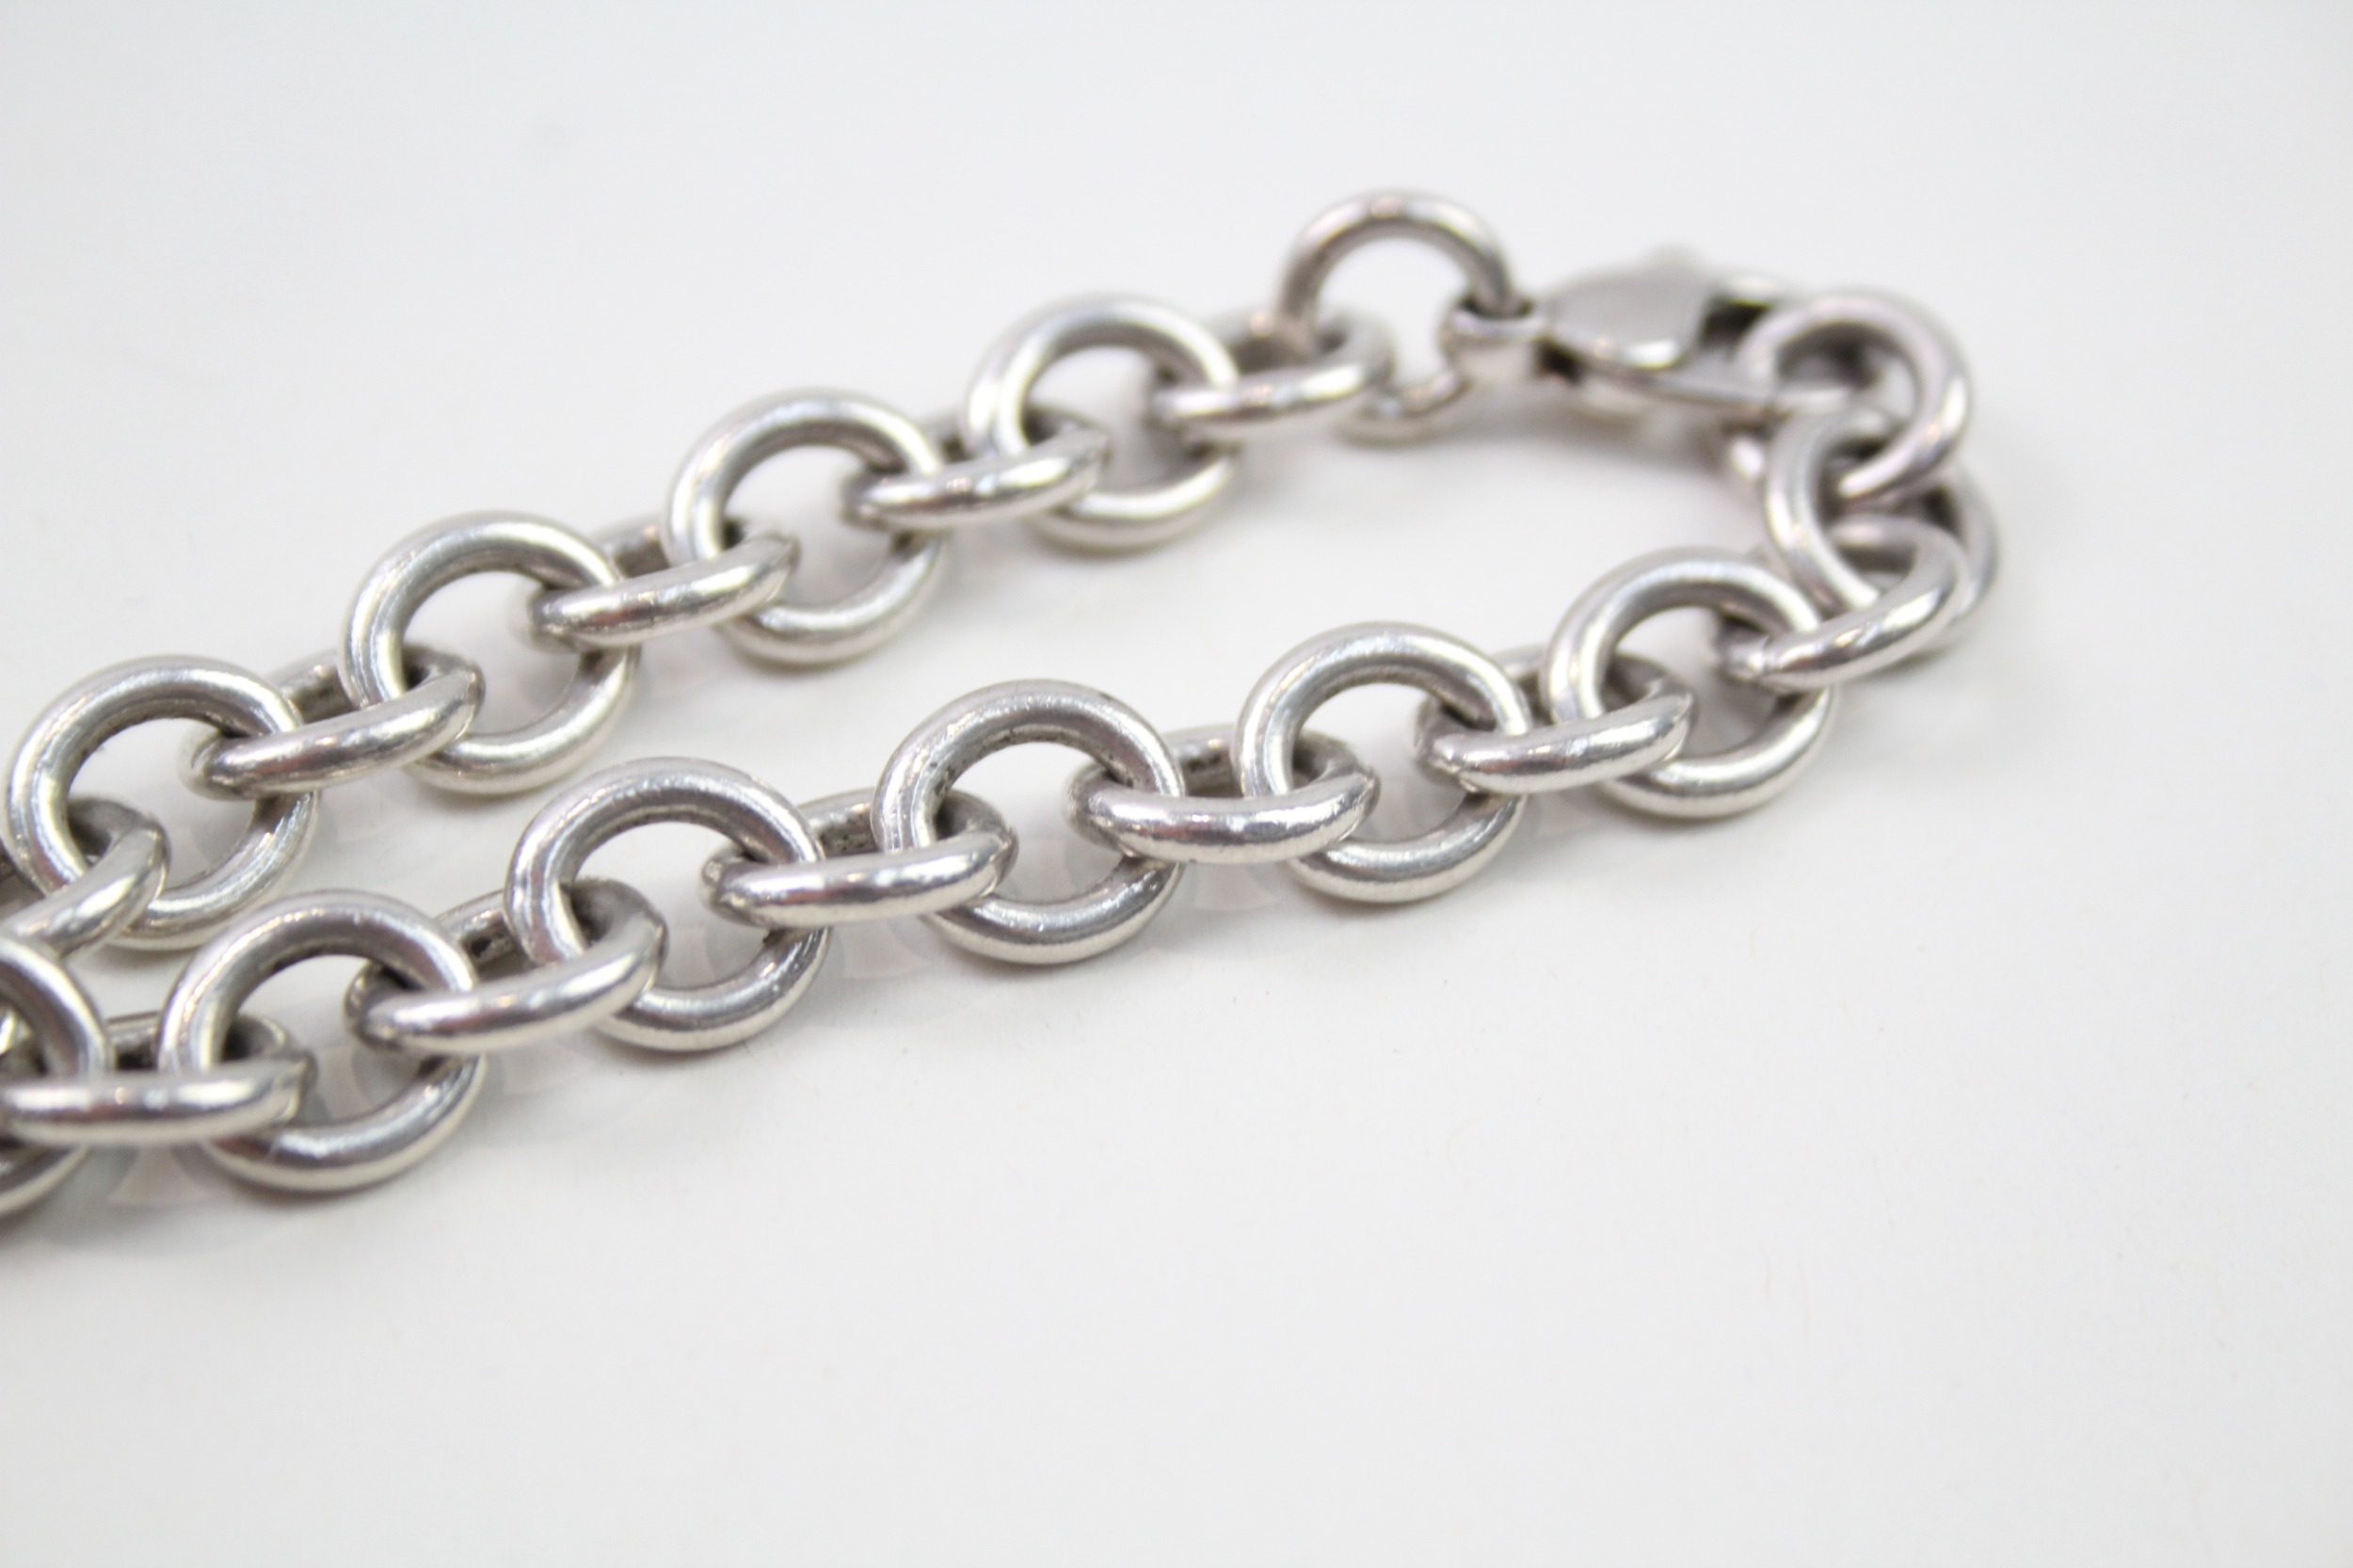 Silver belcher link bracelet with round tag by designer Tiffany & Co (36g) - Image 7 of 7